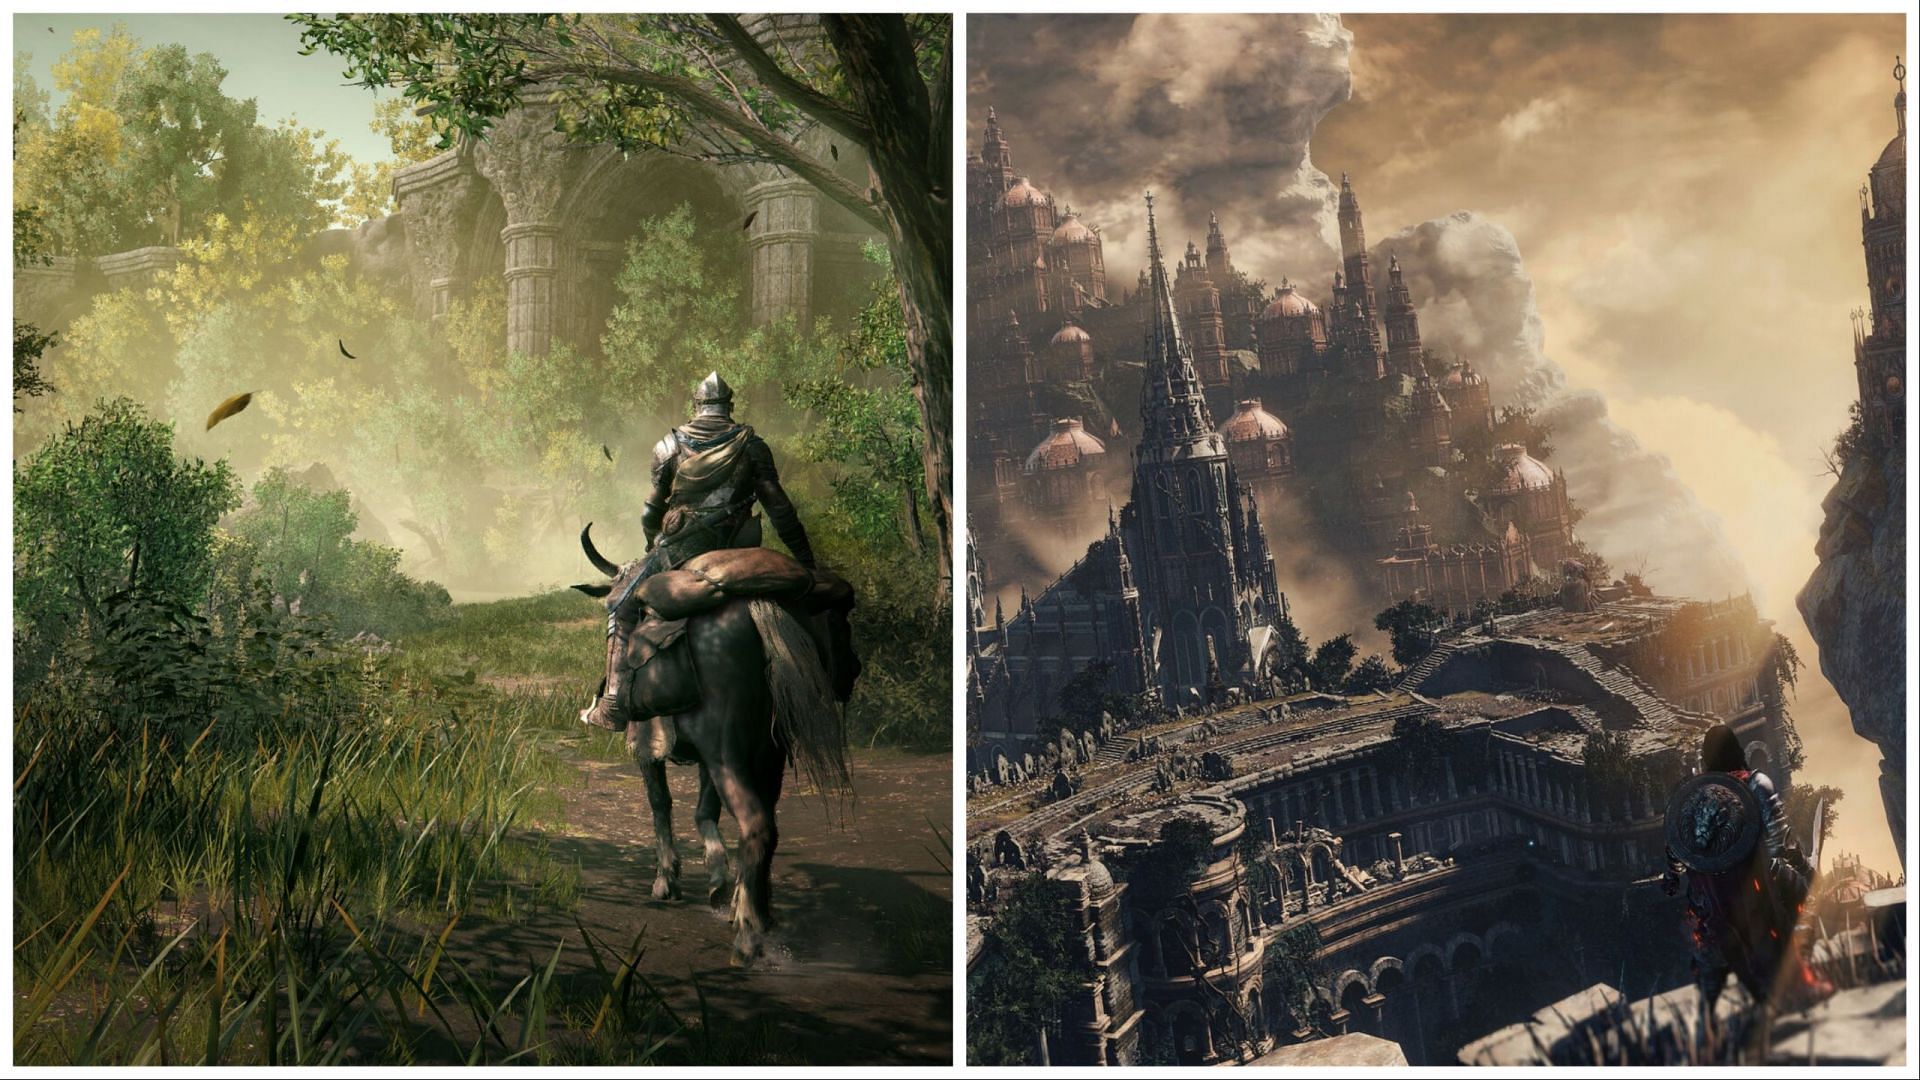 Adventure awaits... (image by FromSoftware)